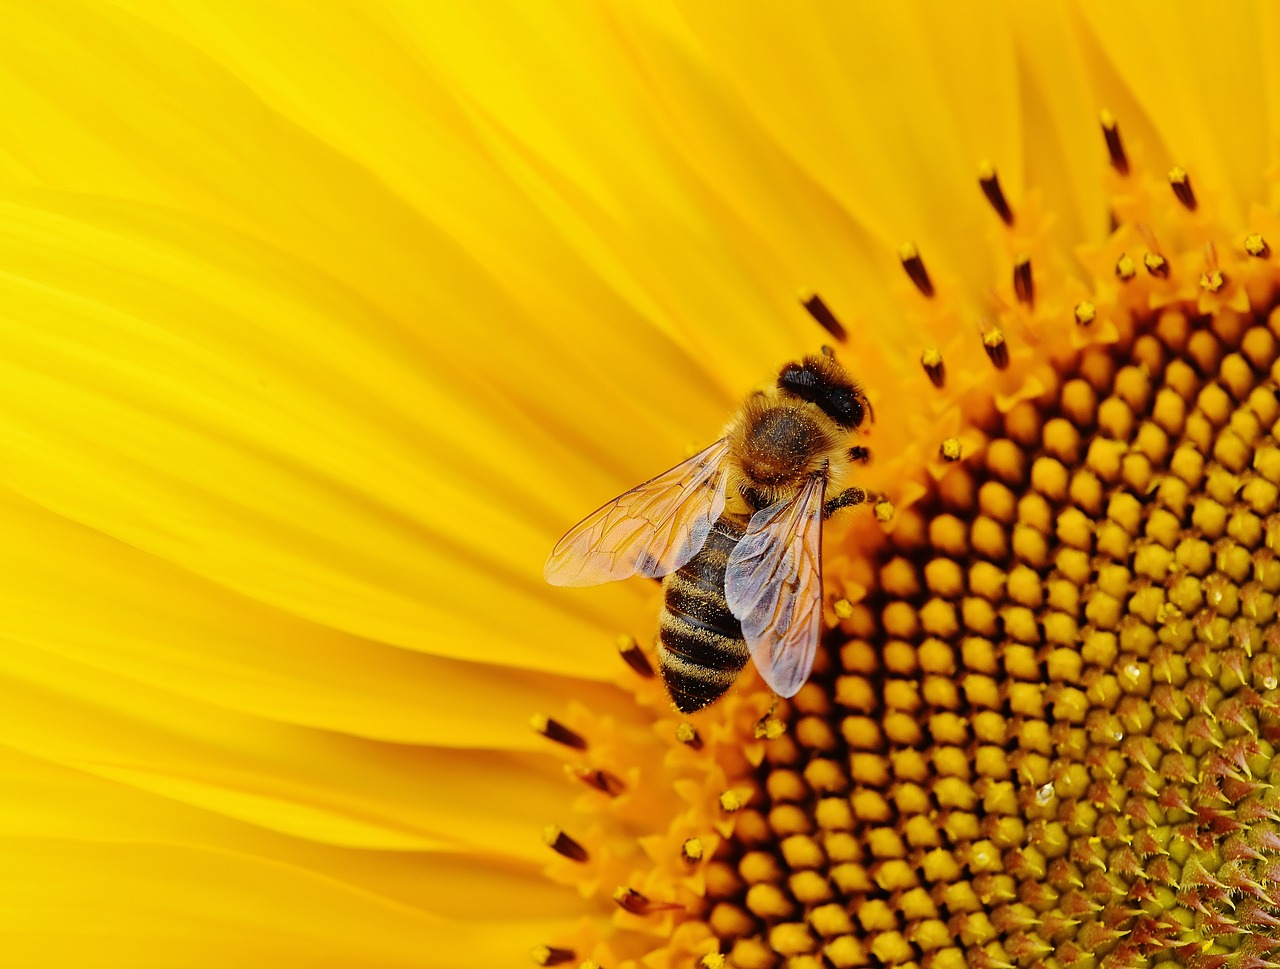 New Research Suggests Bees Are Sentient